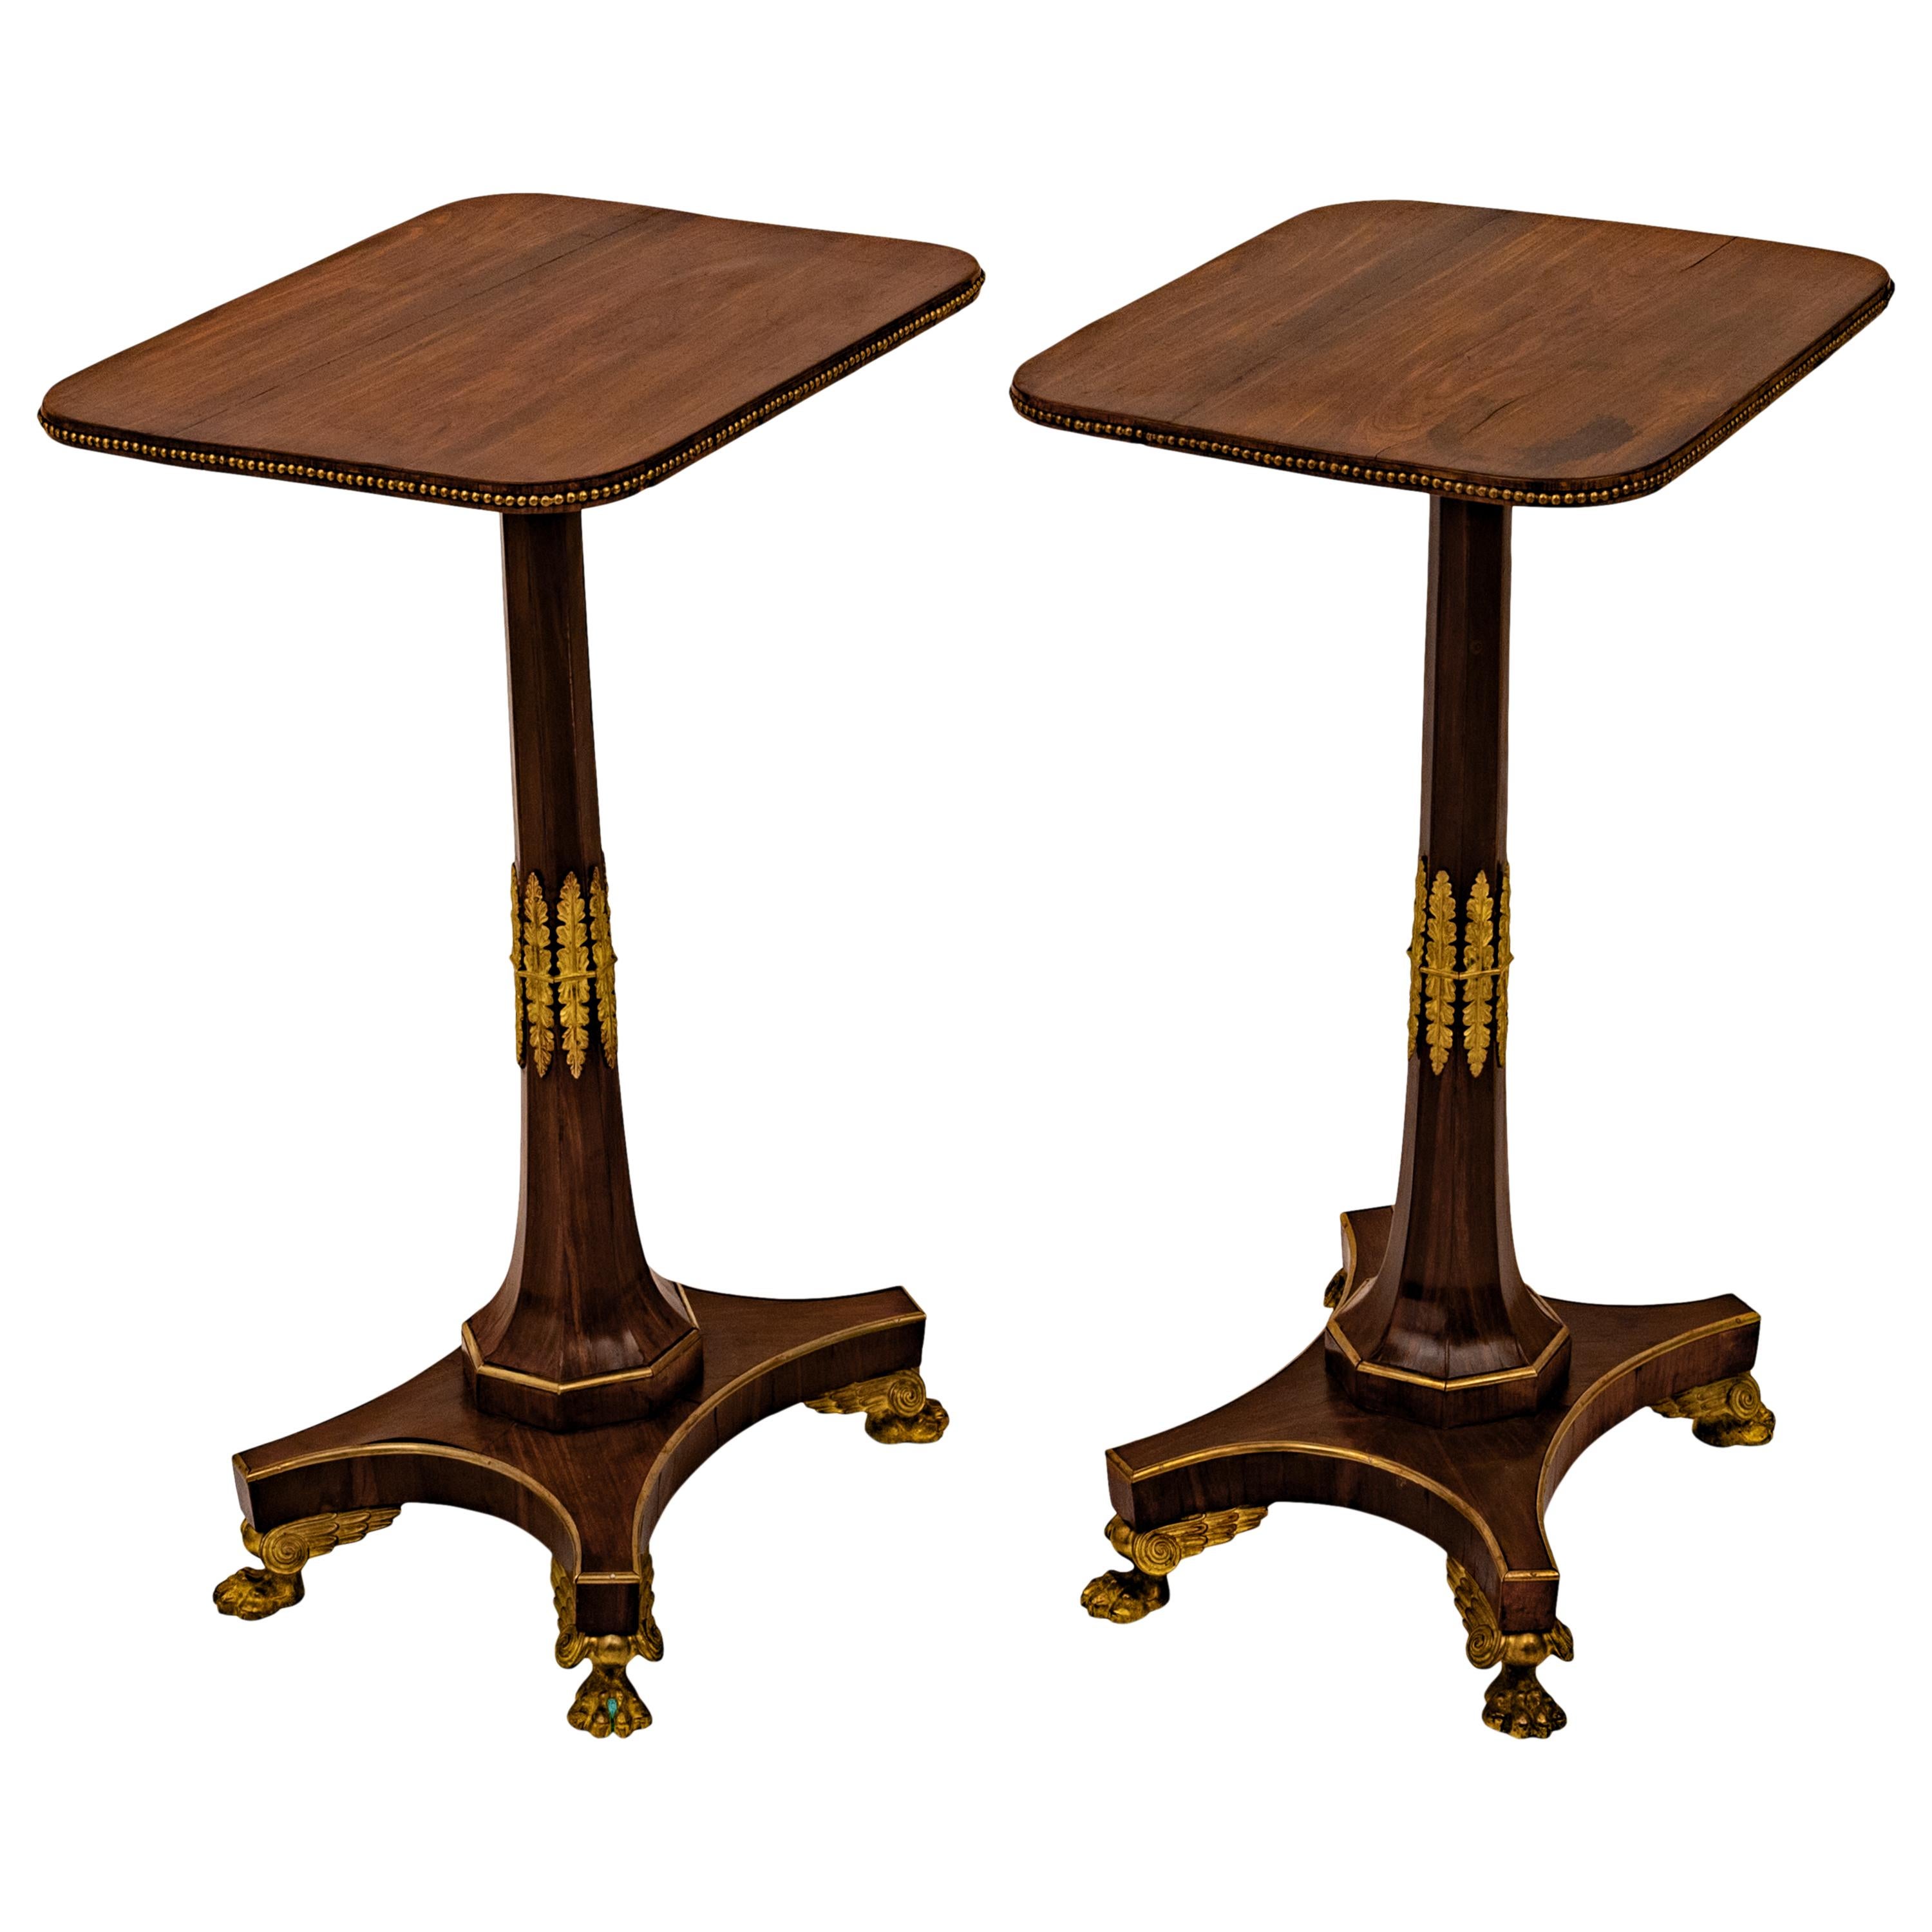 Early 19th Century Pair Antique French Empire Napoleonic Neoclassical Rosewood Ormolu Side Tables